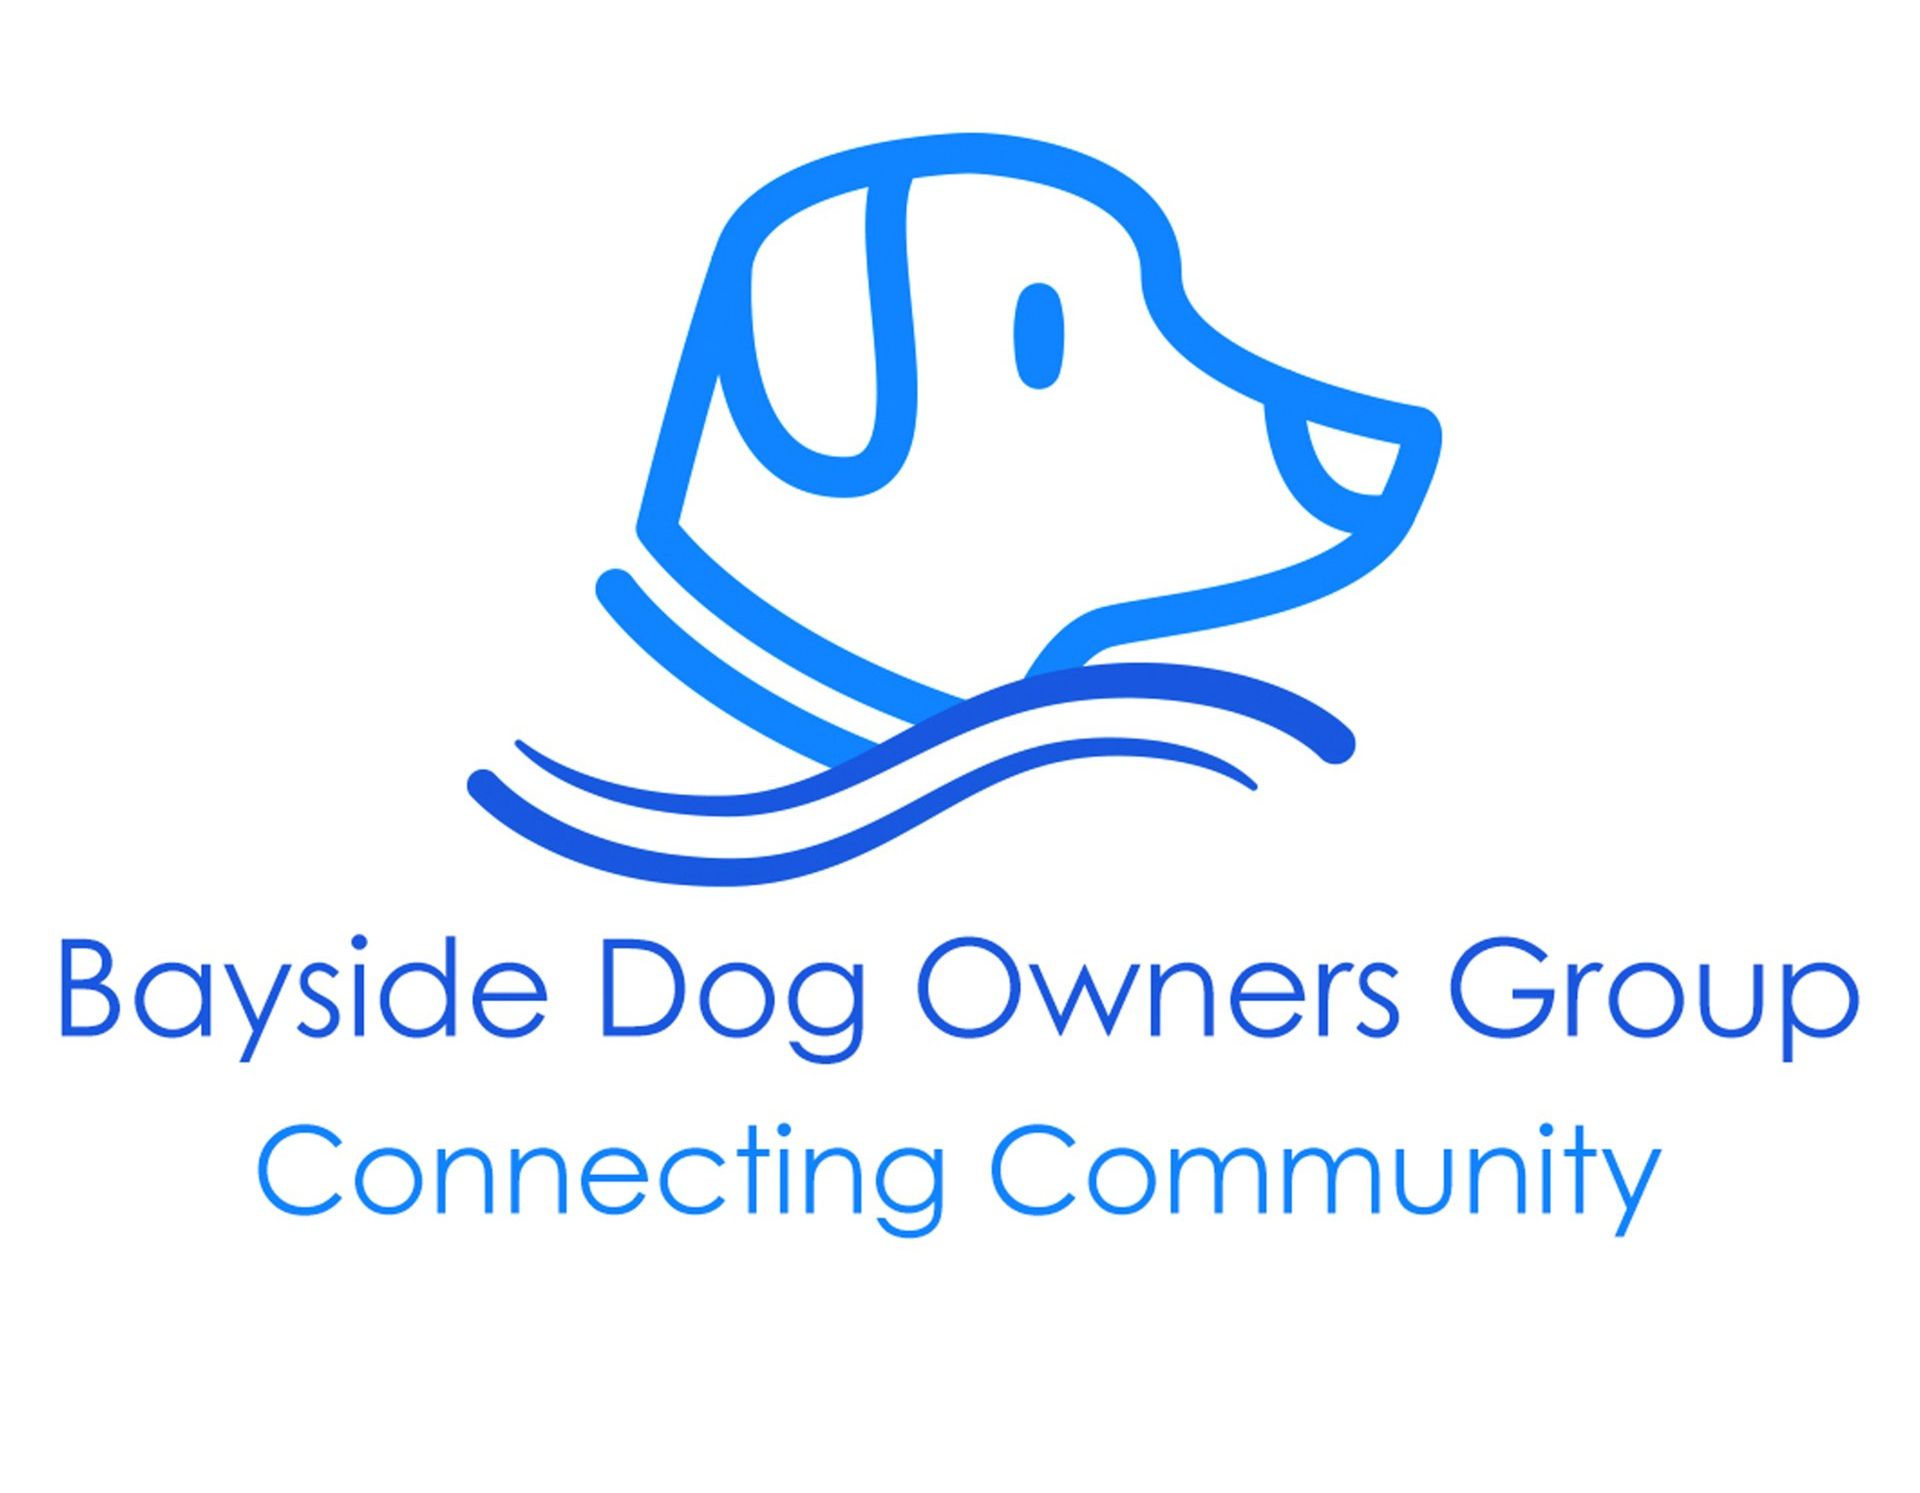 Bayside Dog Owners Group